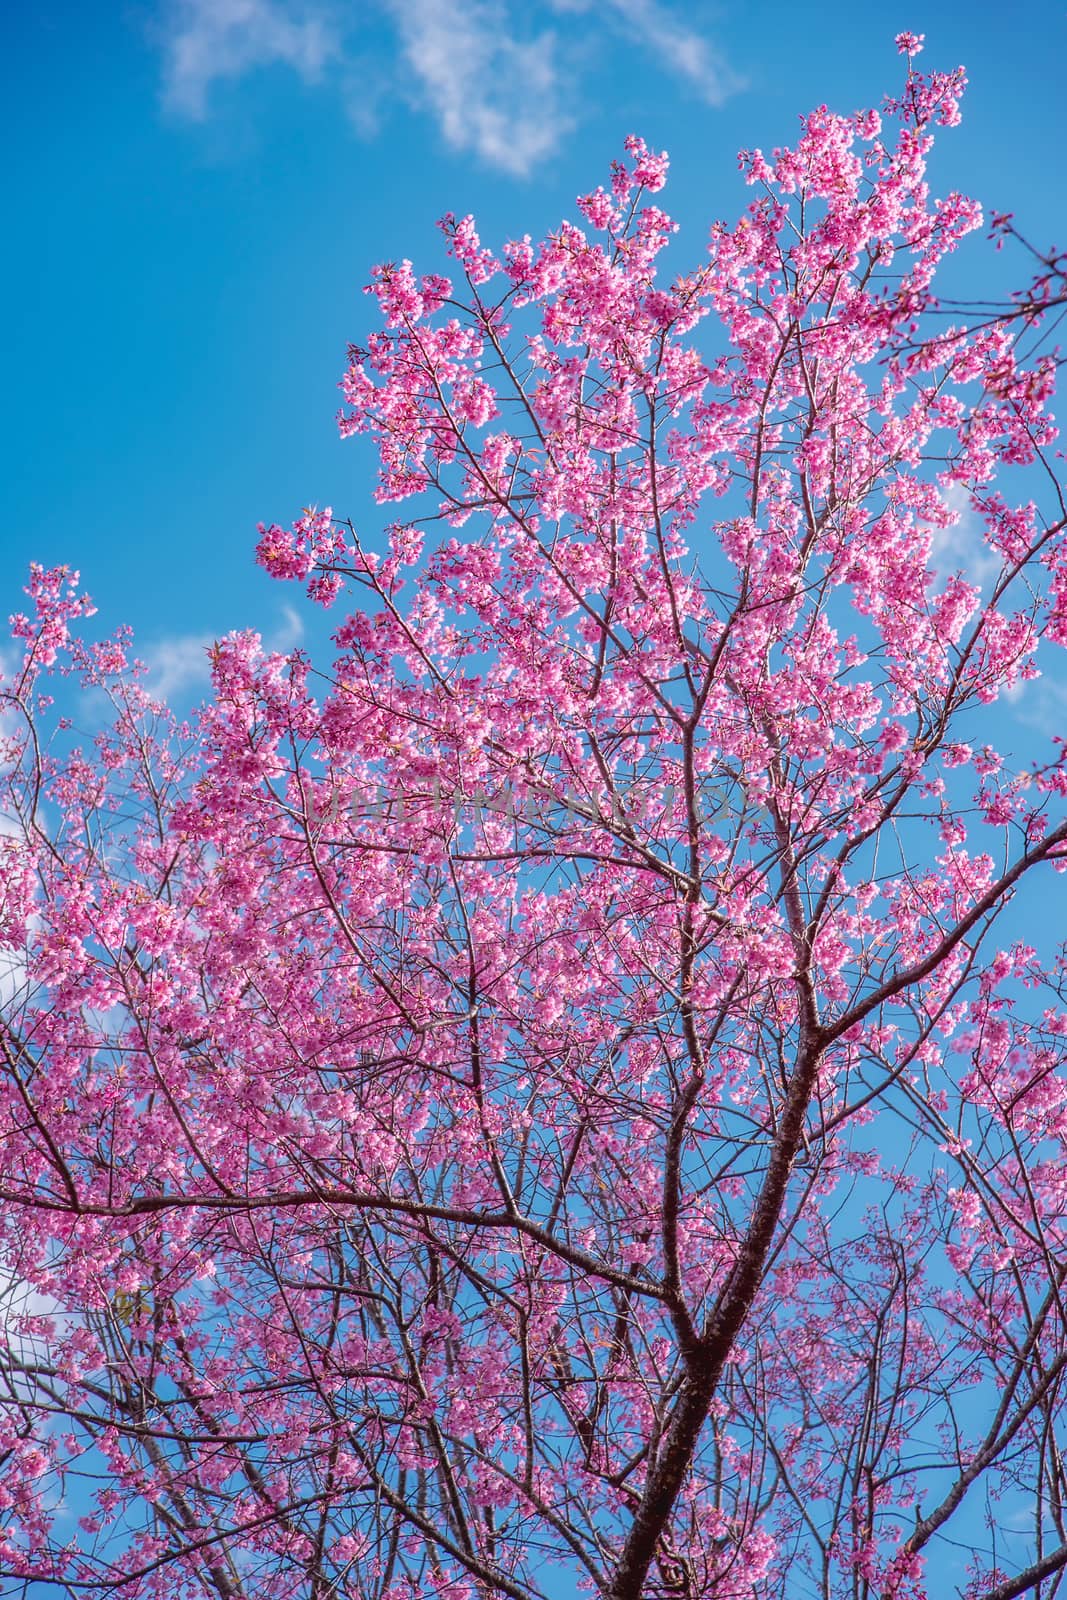 Blossom of Wild Himalayan Cherry (Prunus cerasoides) or Giant tiger flower on blue sky background In Chiang mai, Thailand. Selective focus.